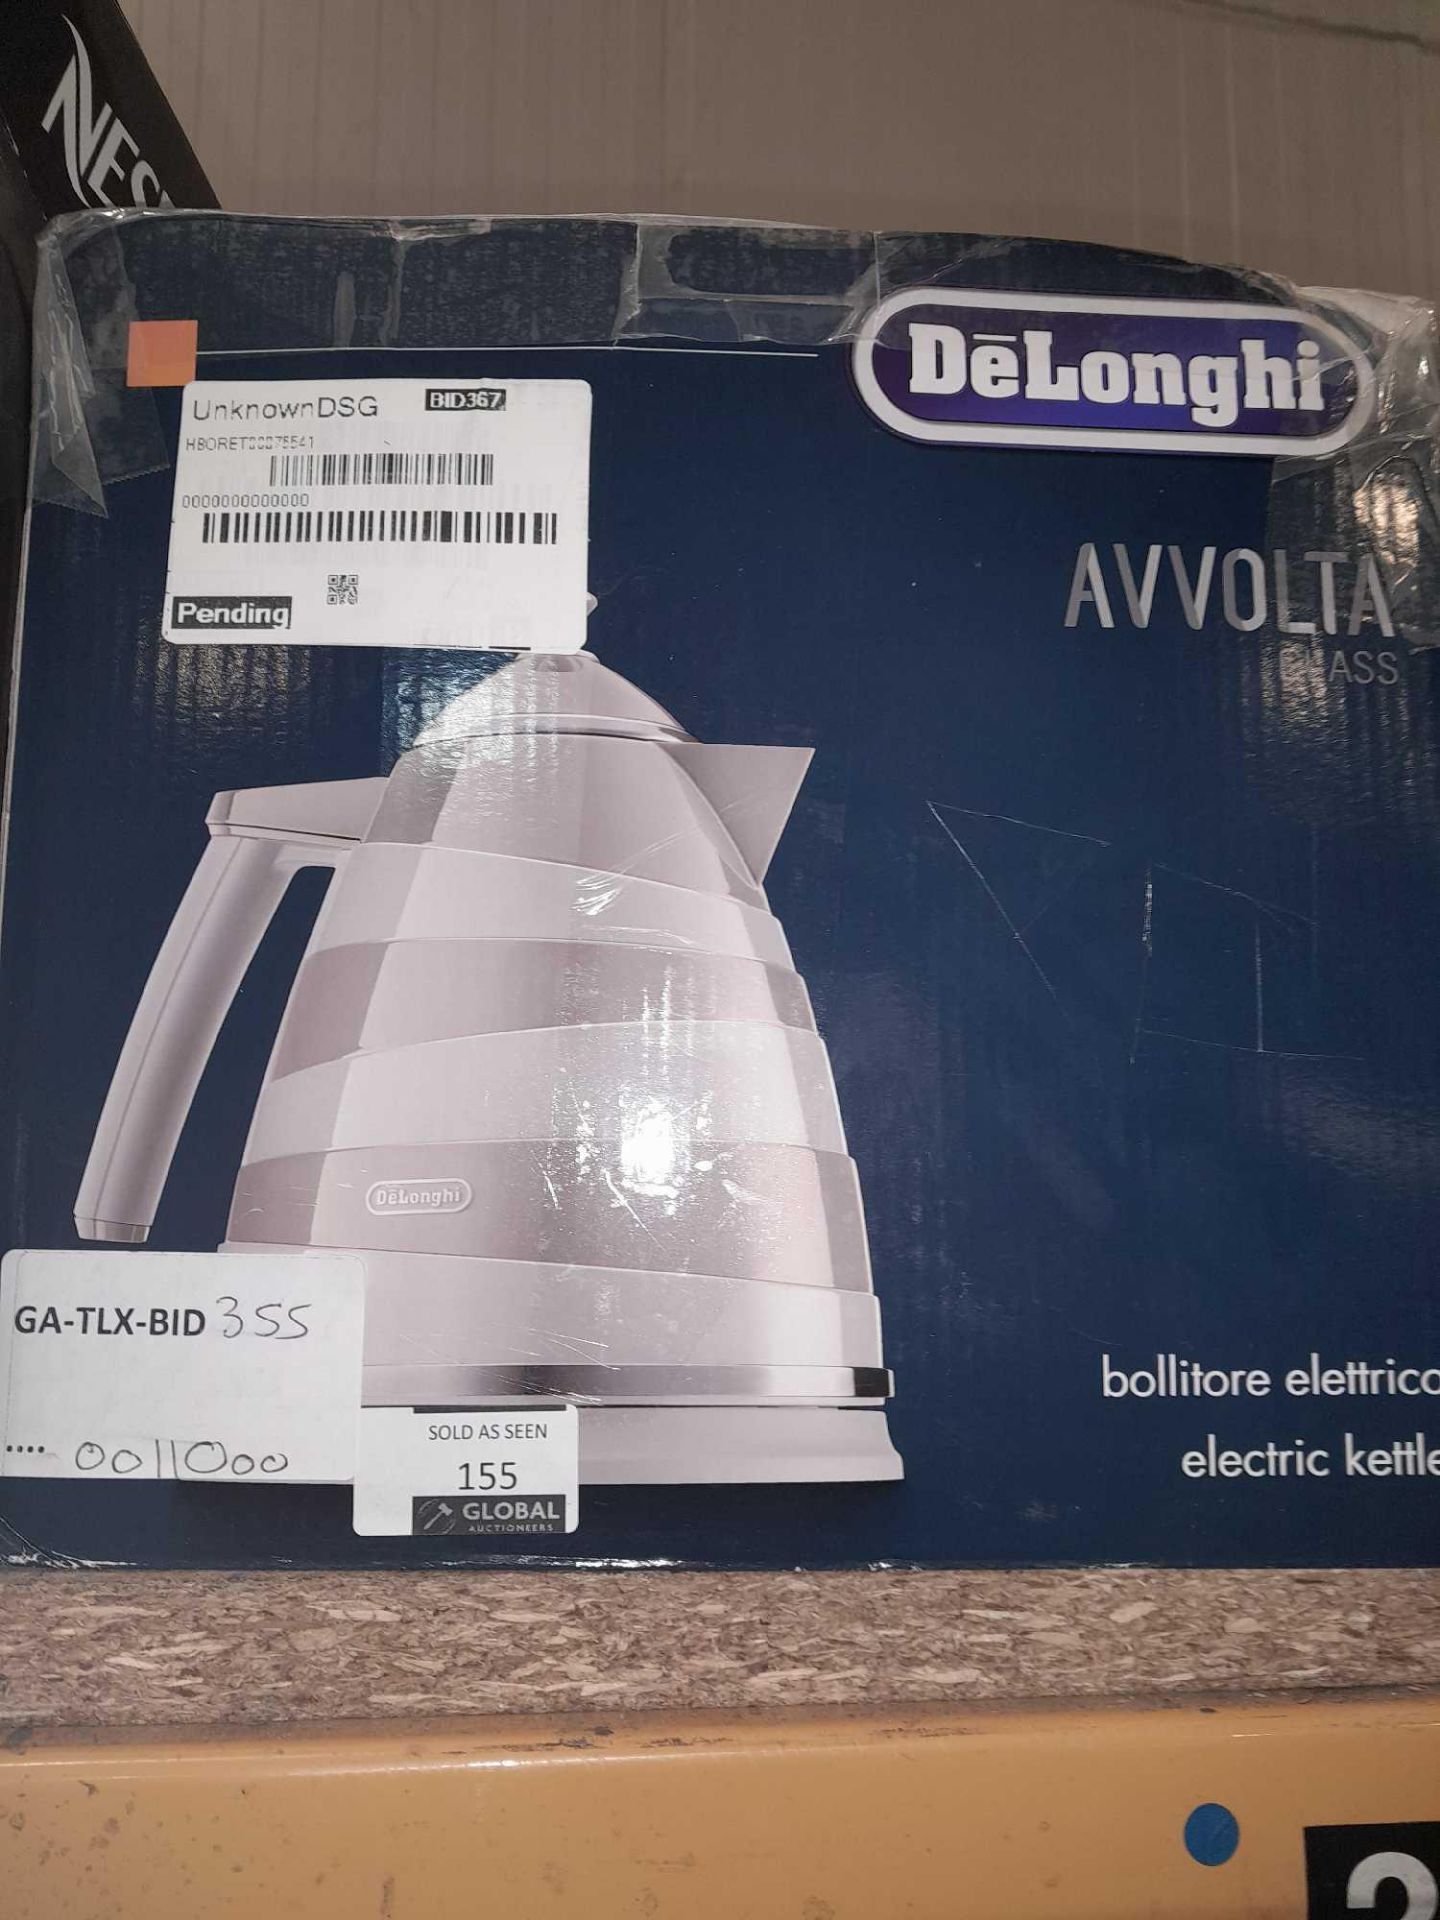 RRP £110 Boxed DeLonghi Avvolta Class Electric Kettle - Image 2 of 2